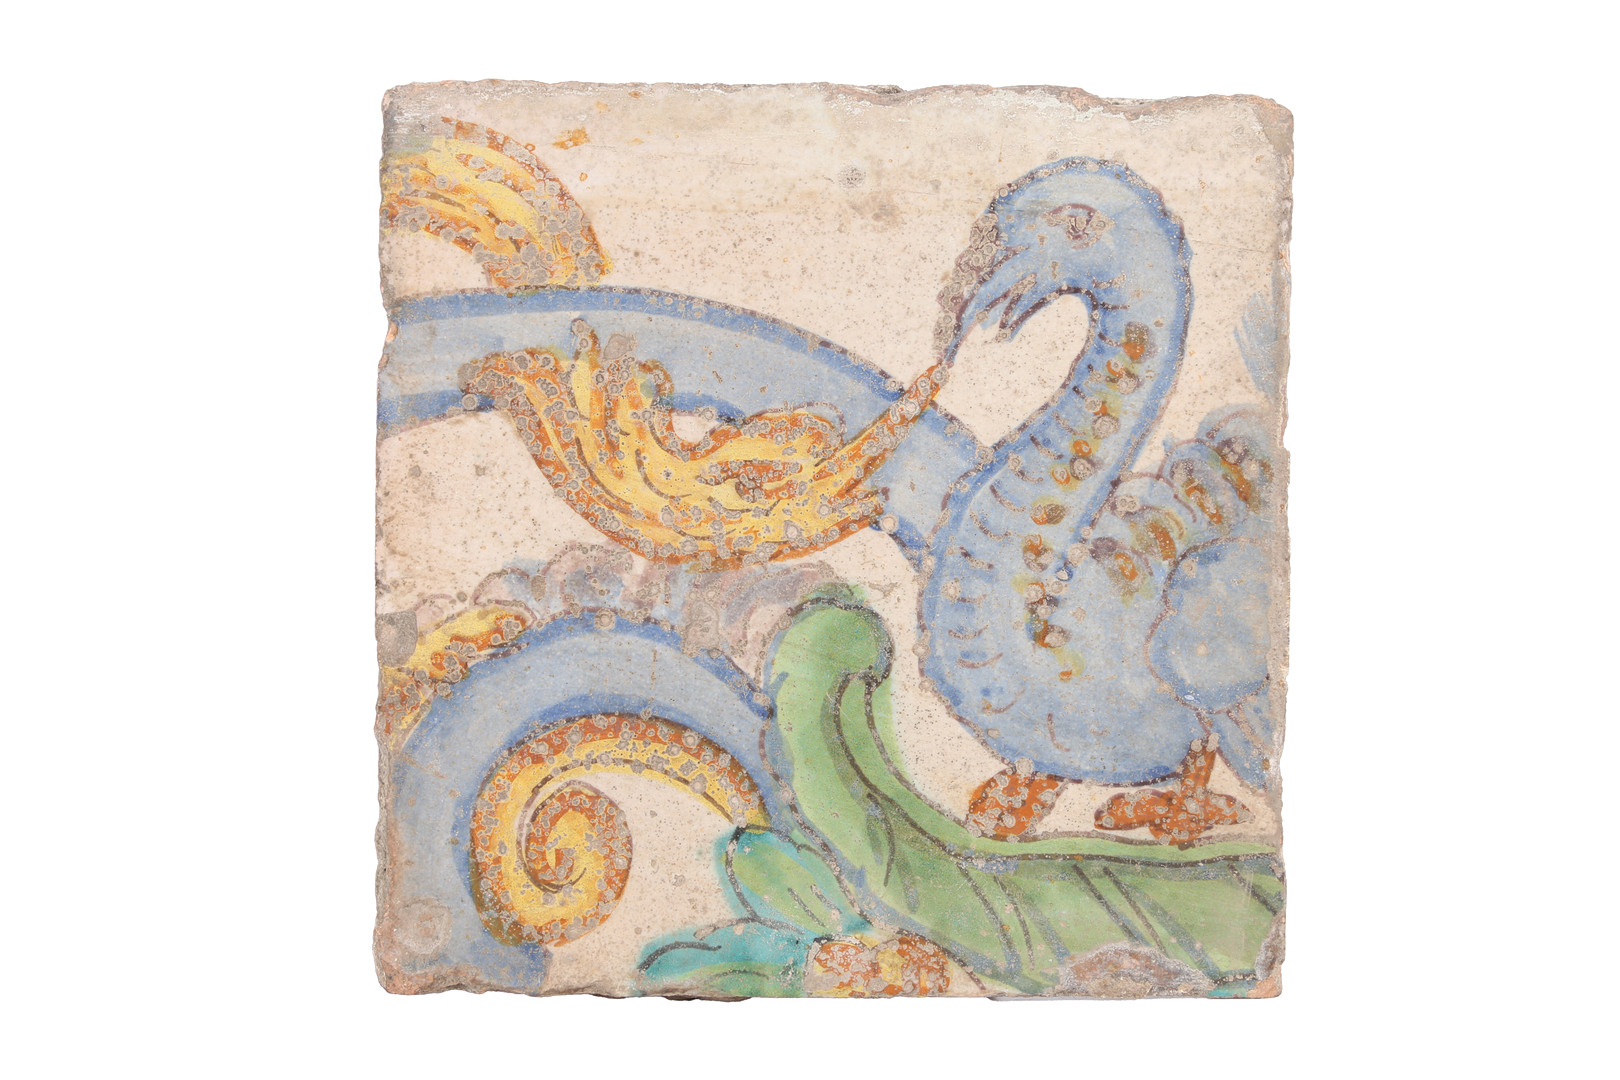 TWO 17TH CENTURY POLYCHROME-DECORATED TILES, SPANISH. - Image 4 of 5